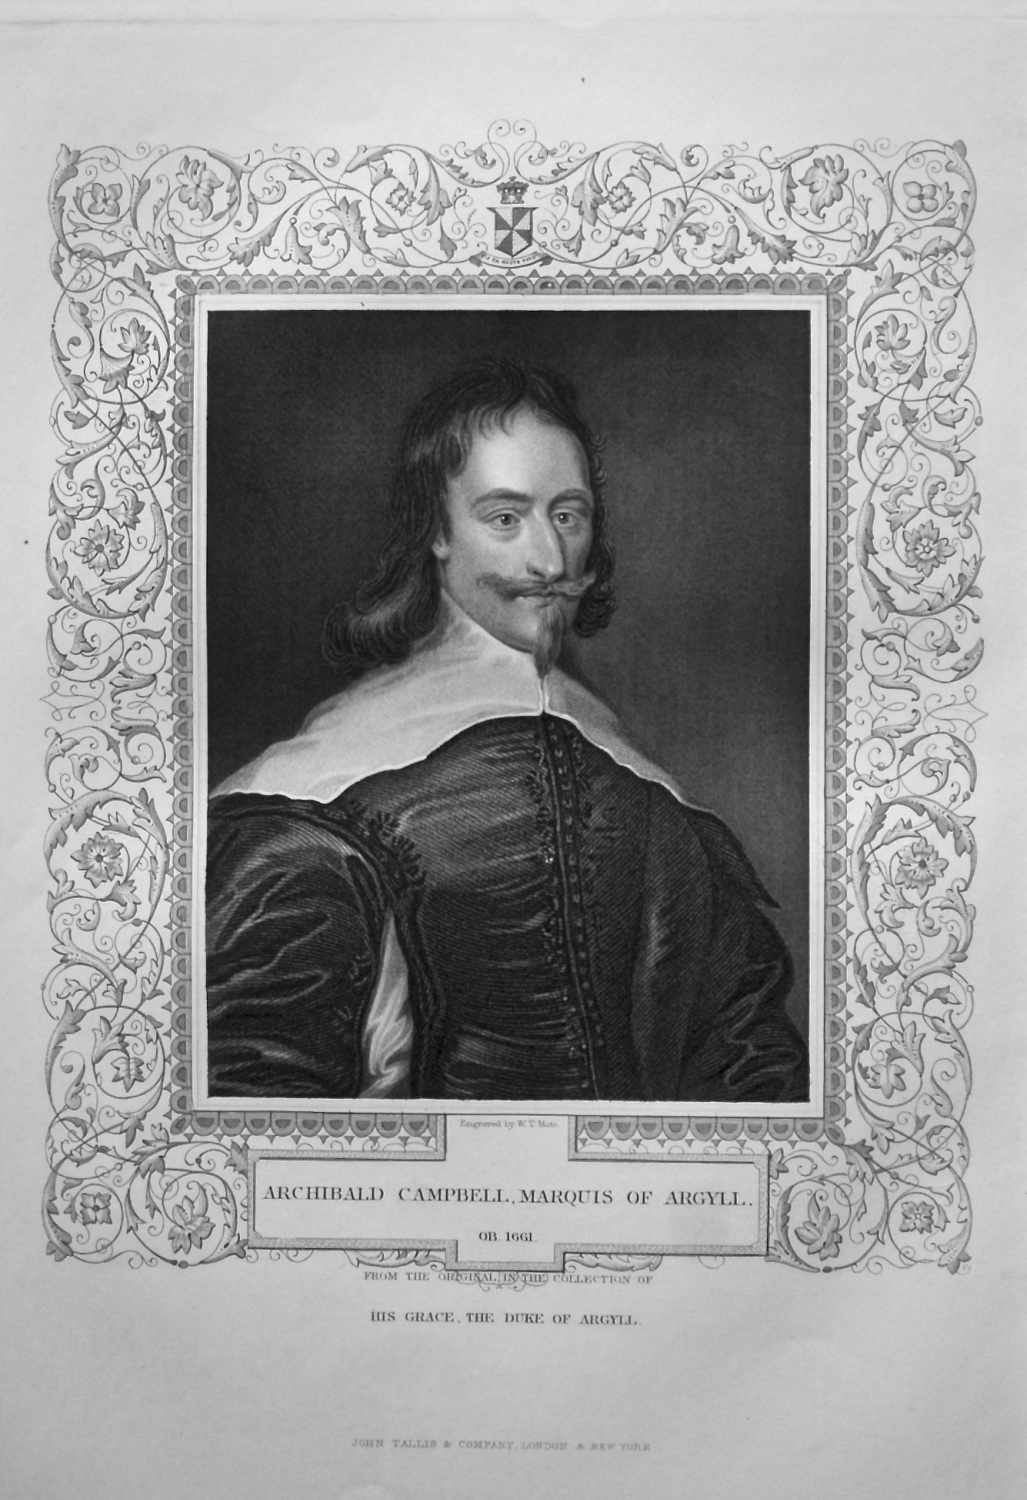 Archibald Campbell, Marquis of Argyll.  OB. 1661.  From the original in the